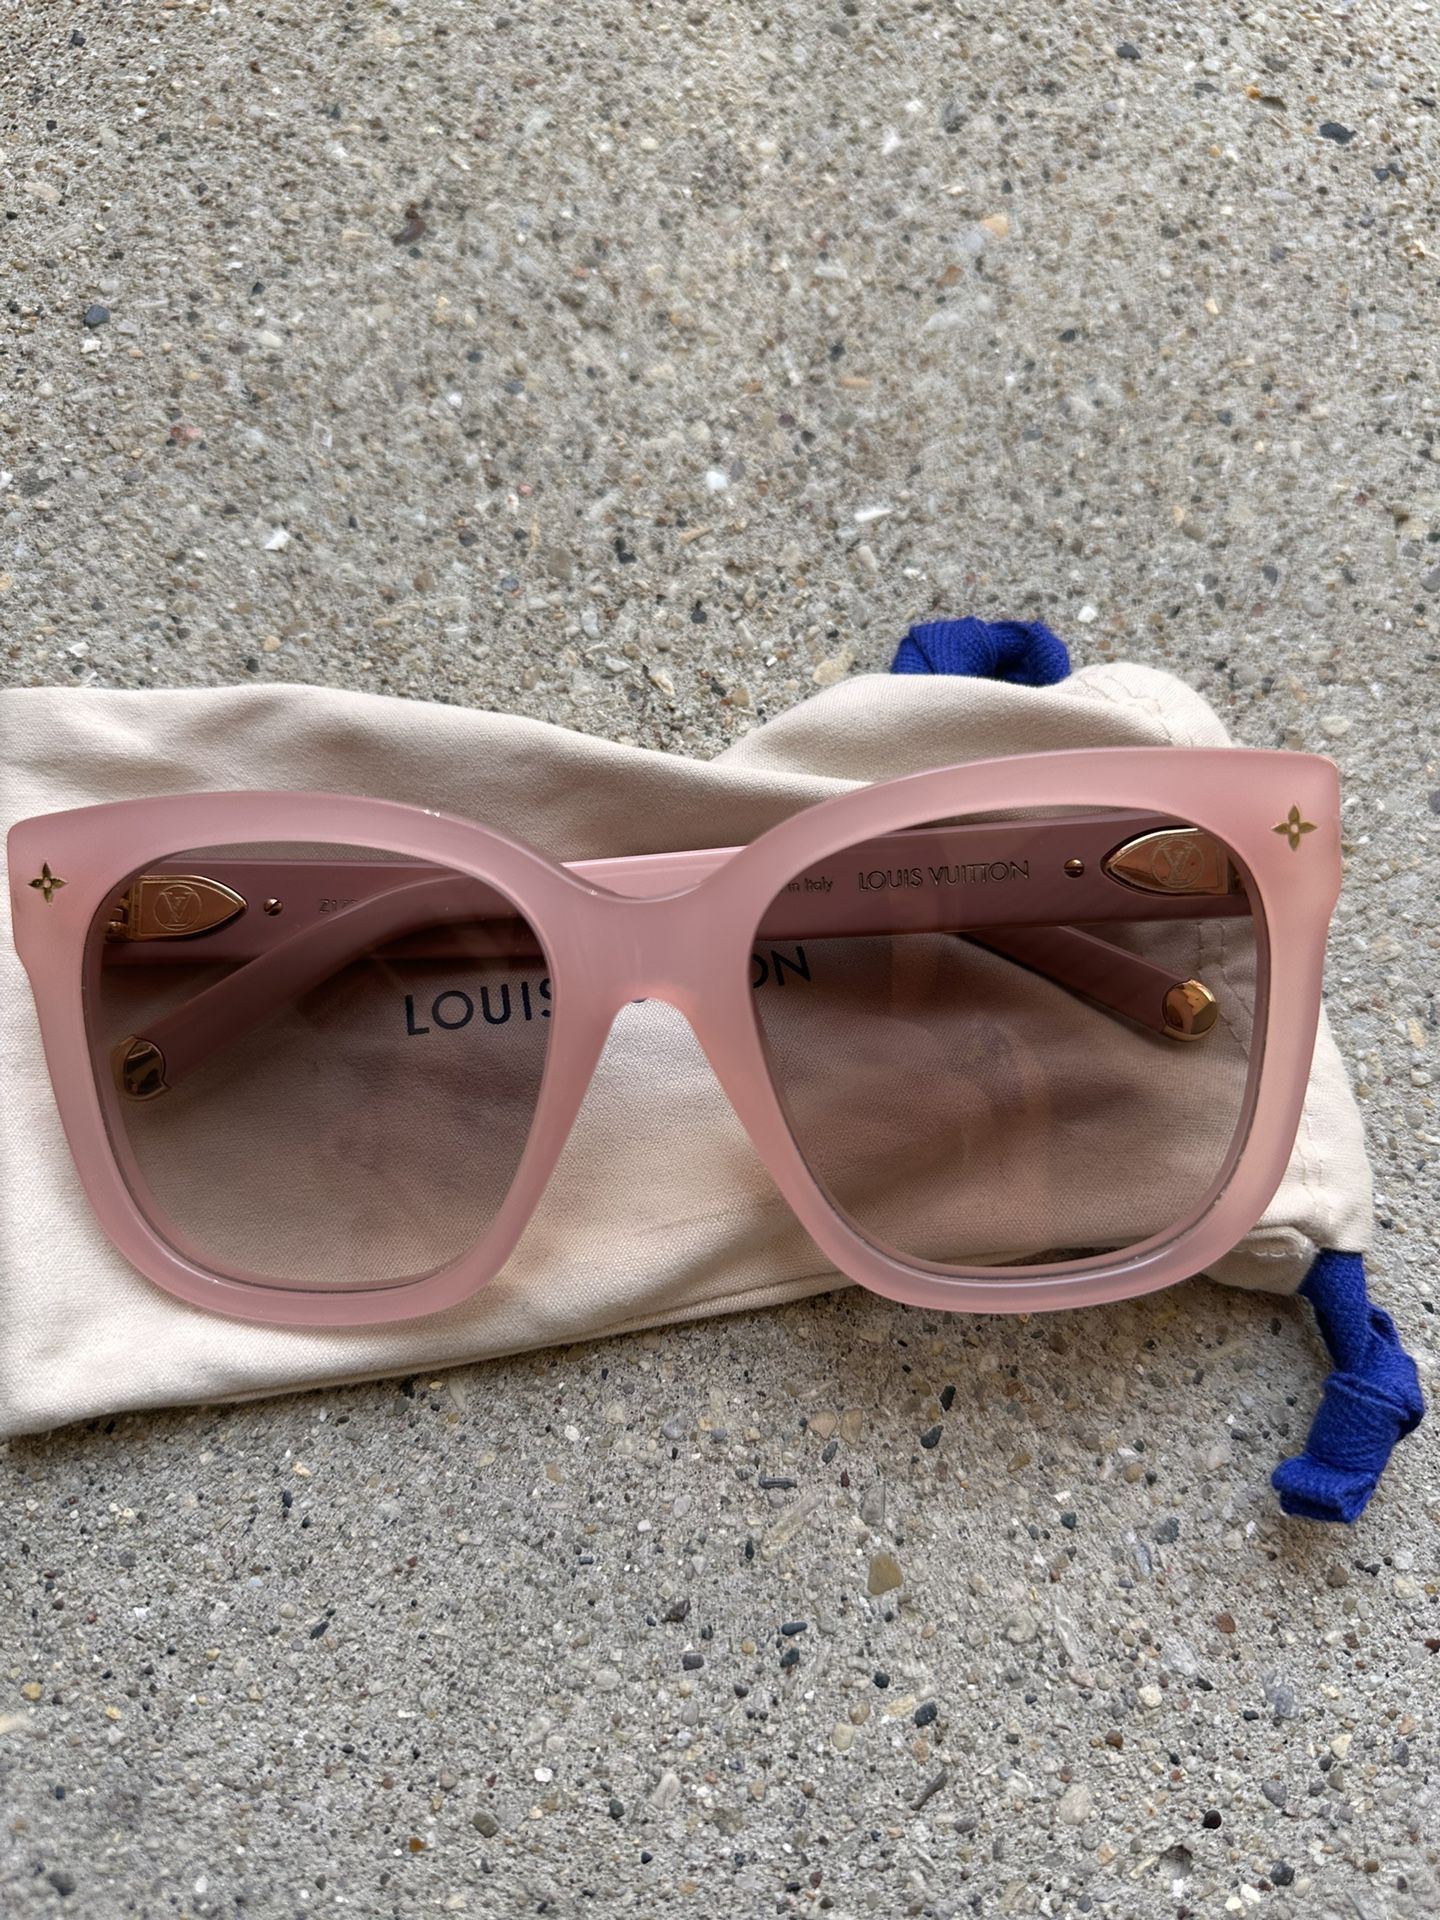 Sell Louis Vuitton Clear Glasses